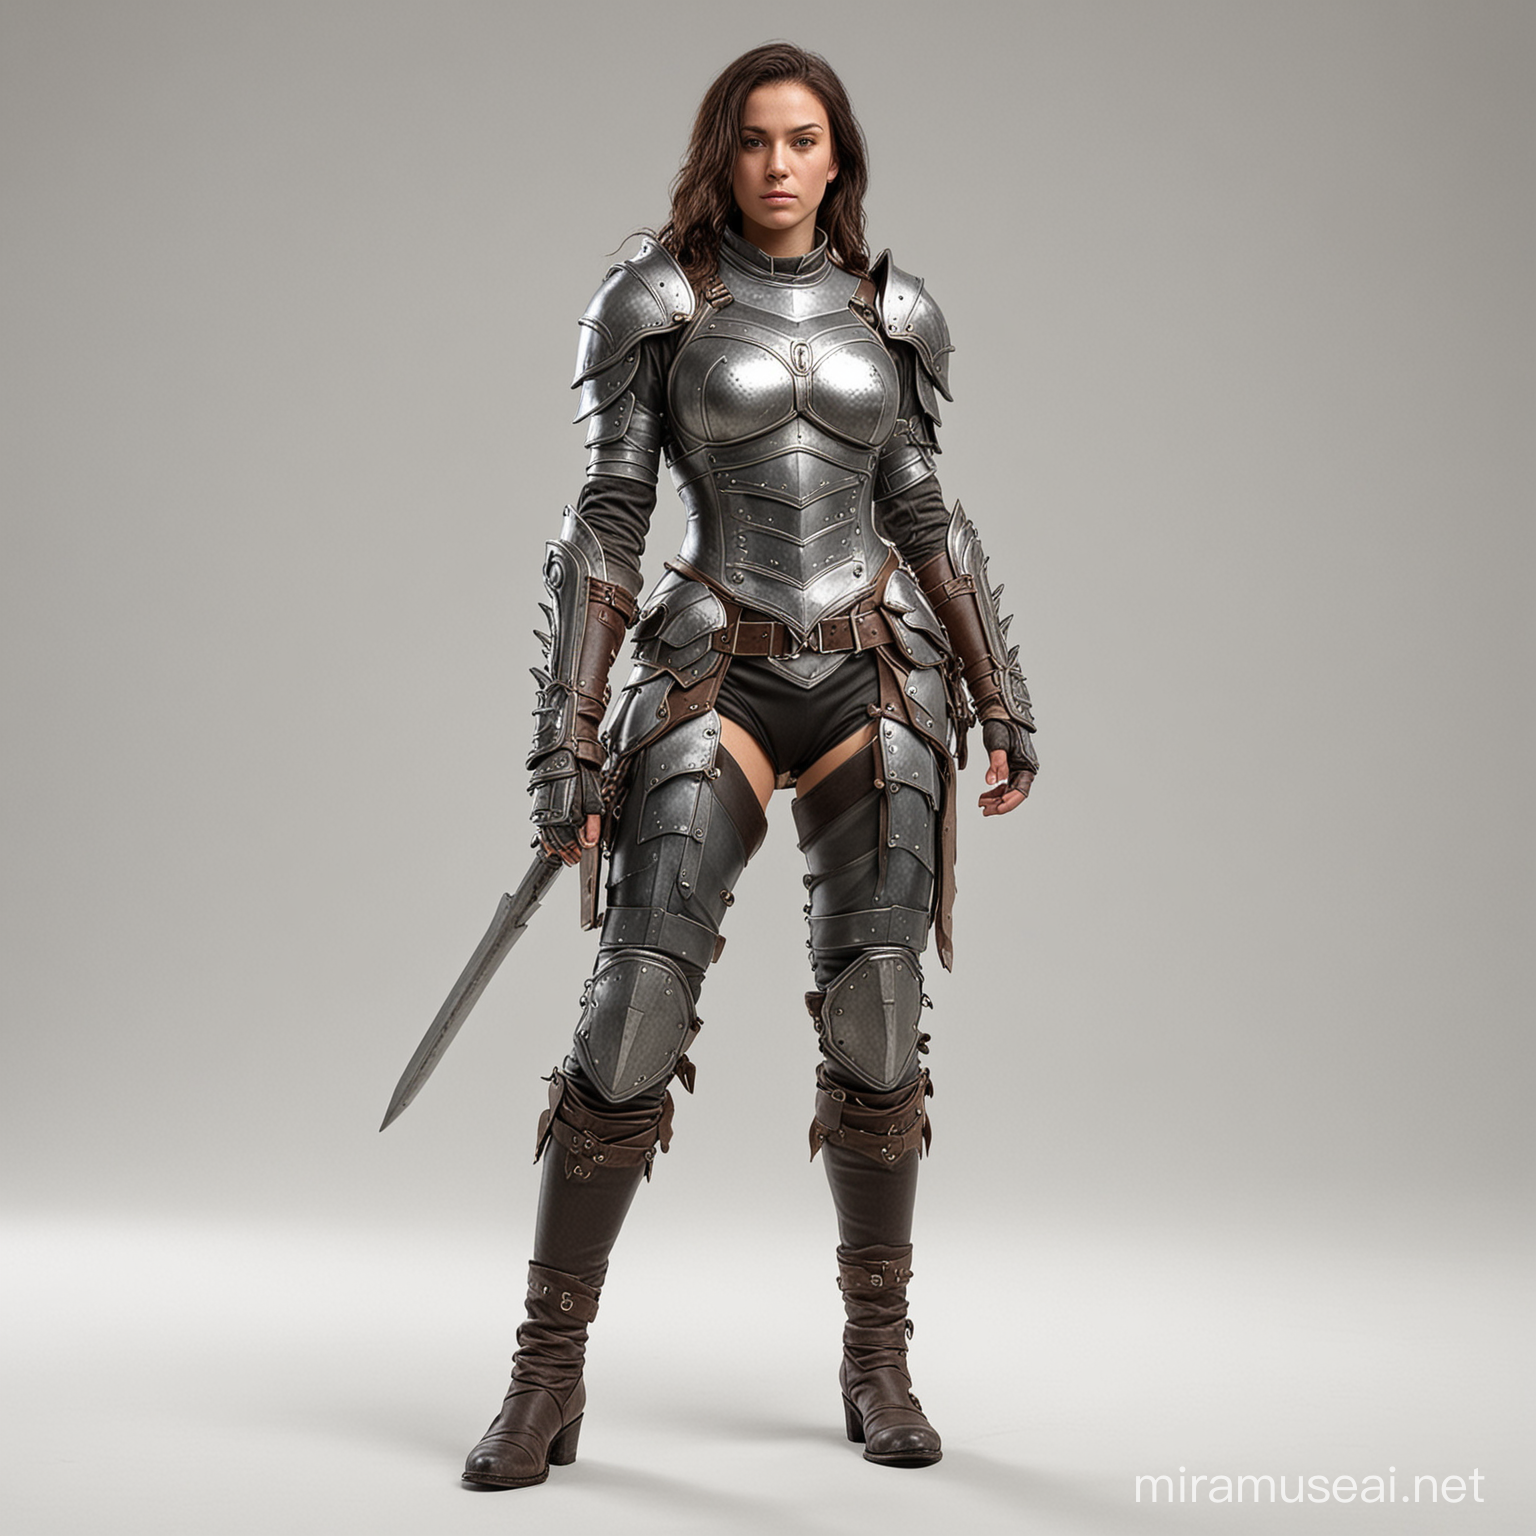 Female Warrior in Armor with Boots on White Background